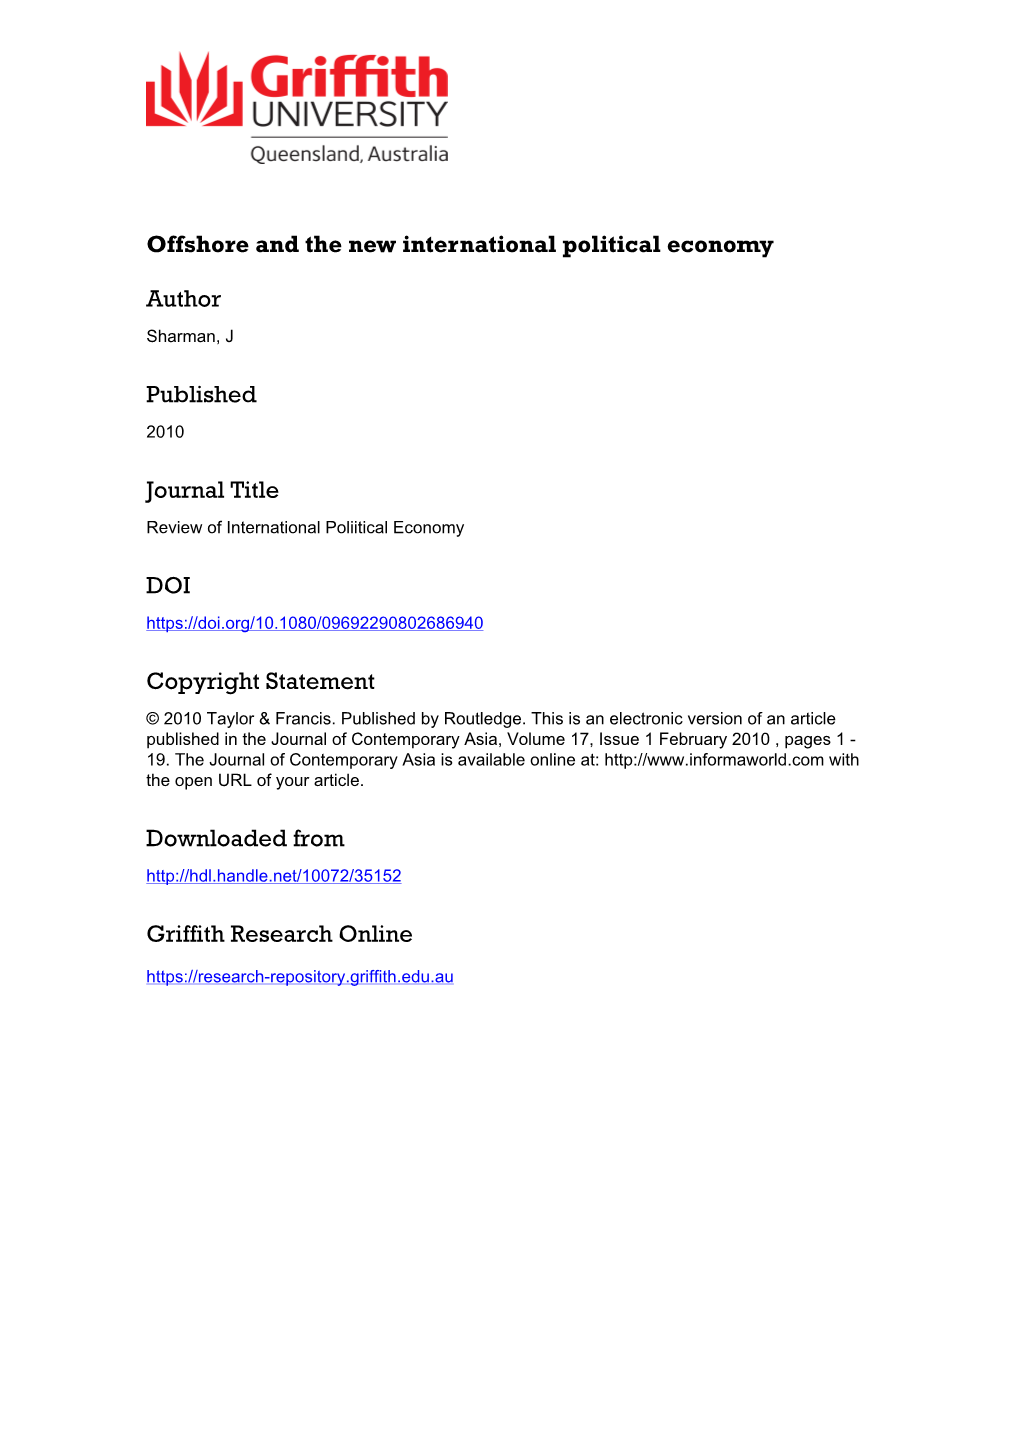 Offshore and the New International Political Economy